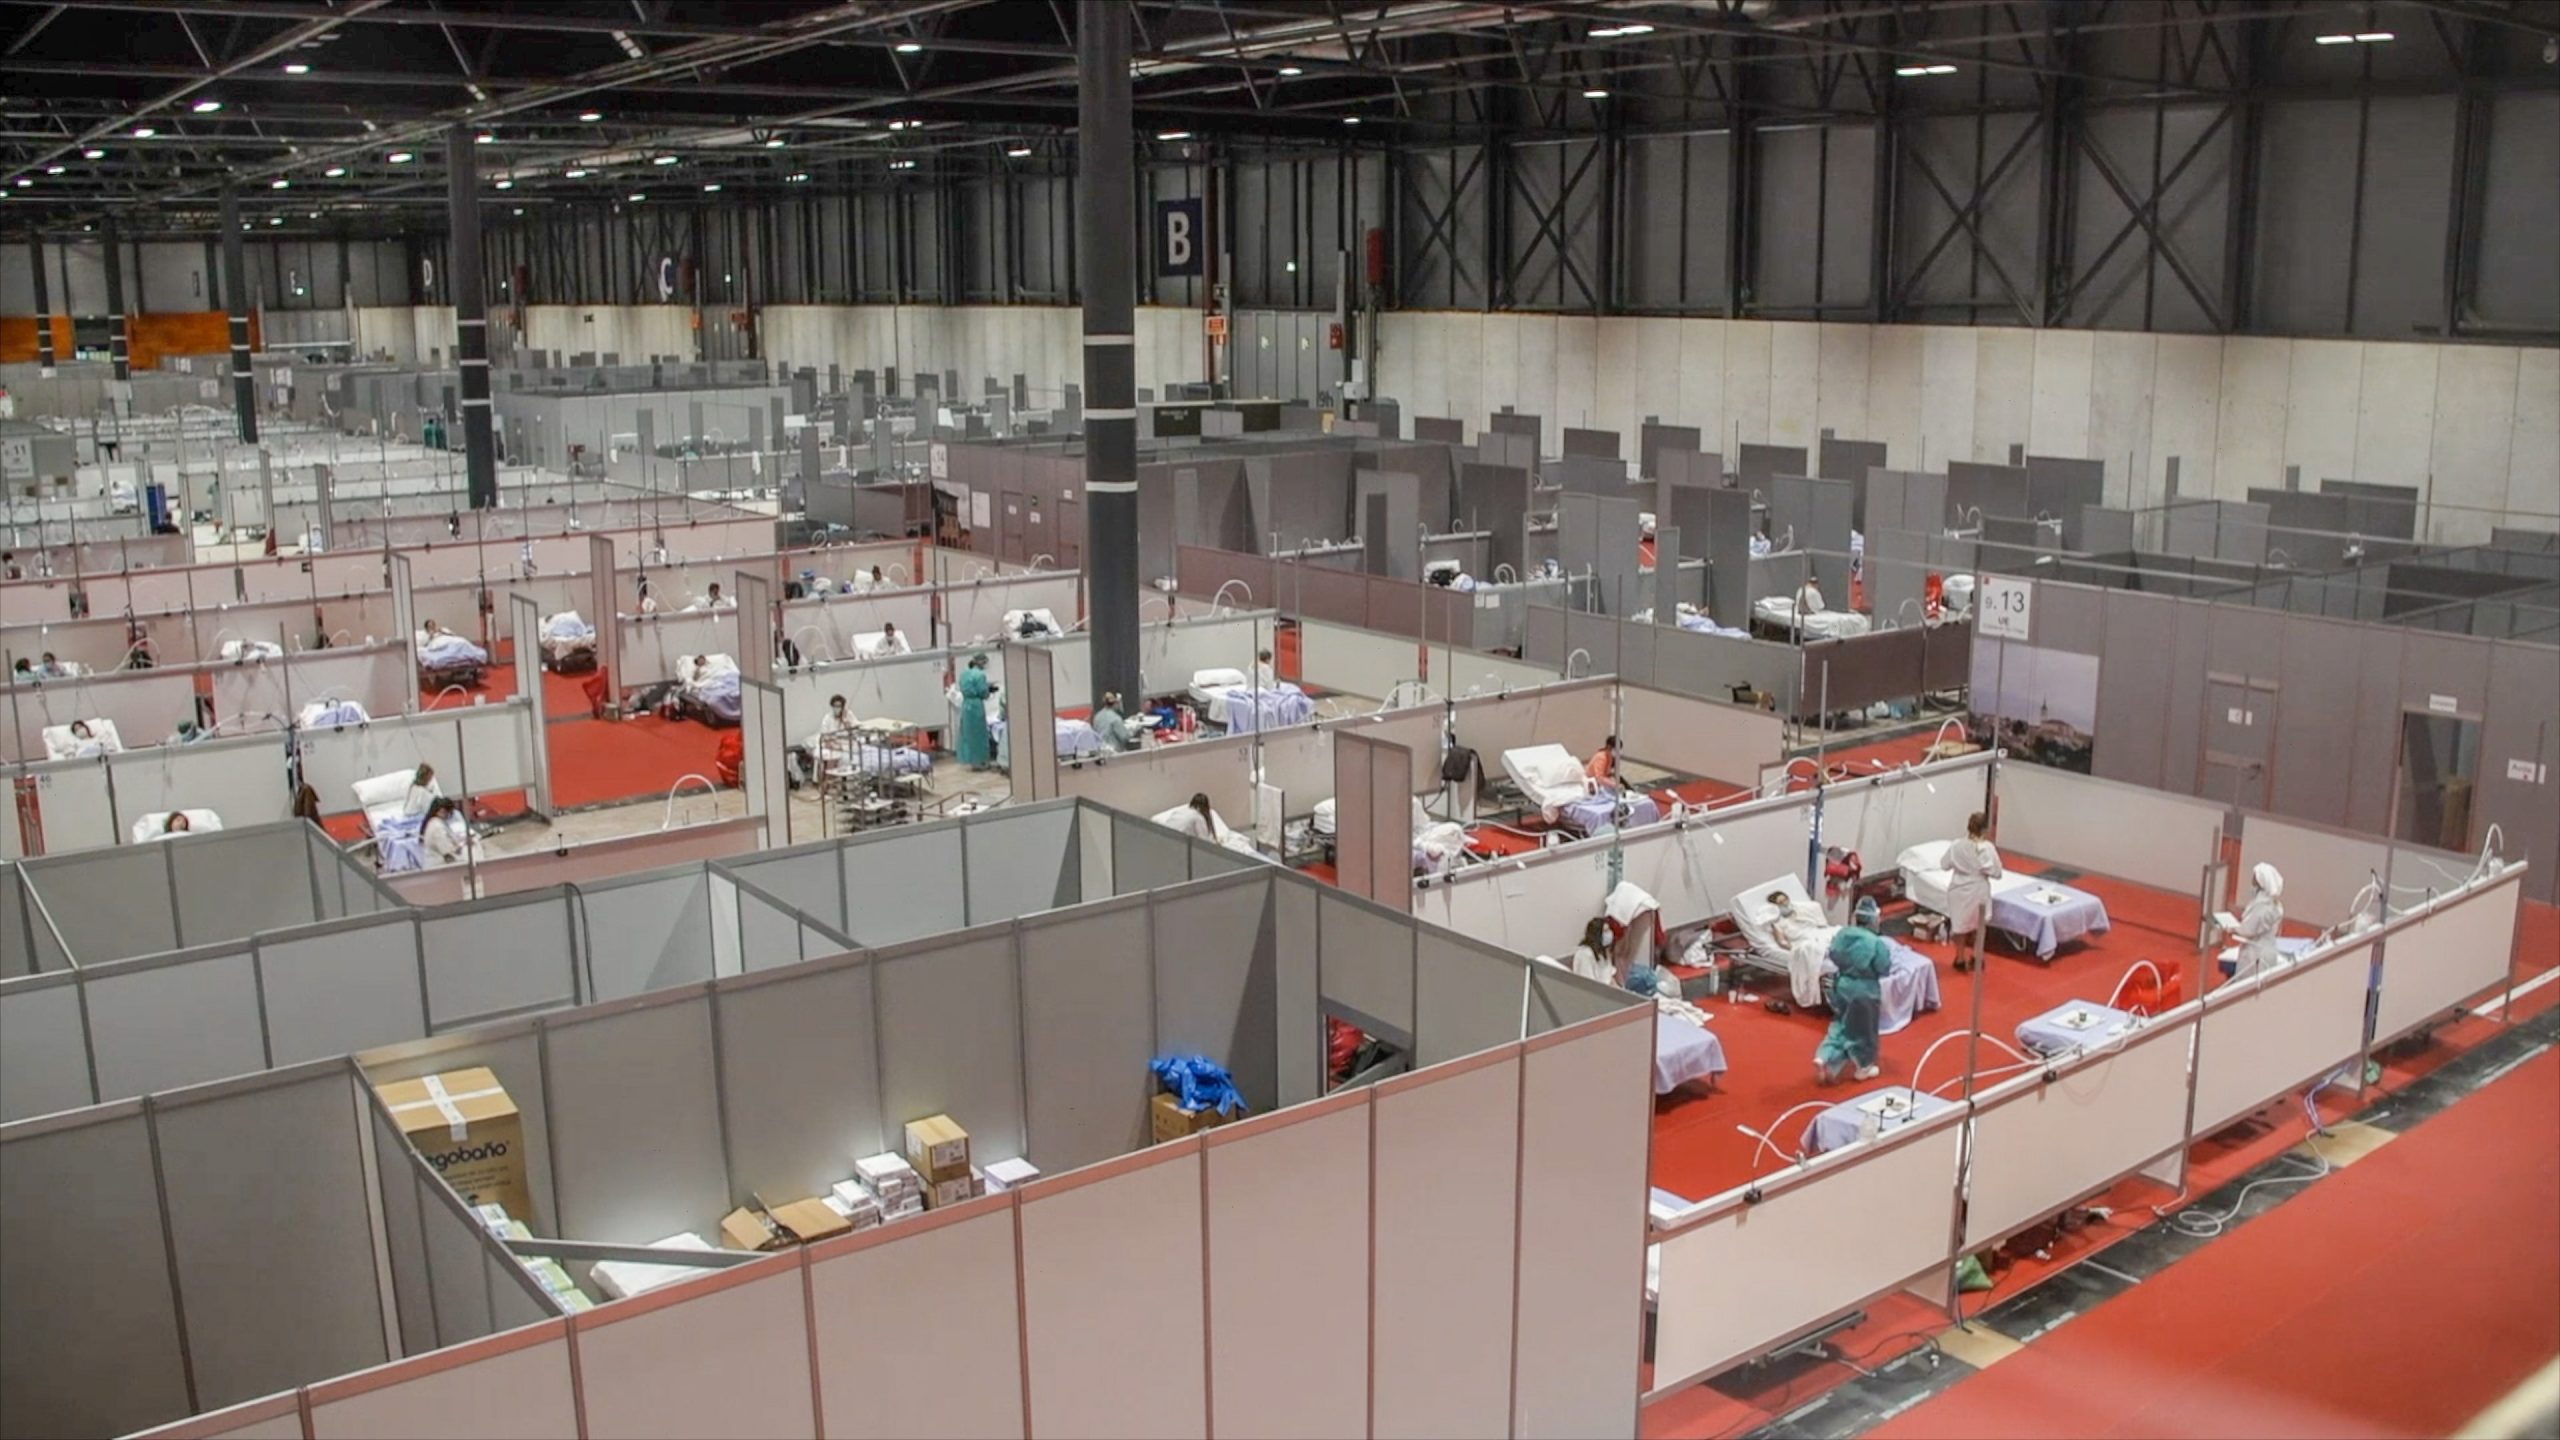 From conferences, to critical care: Exhibition venue transforms into field hospital – Cisco Blogs